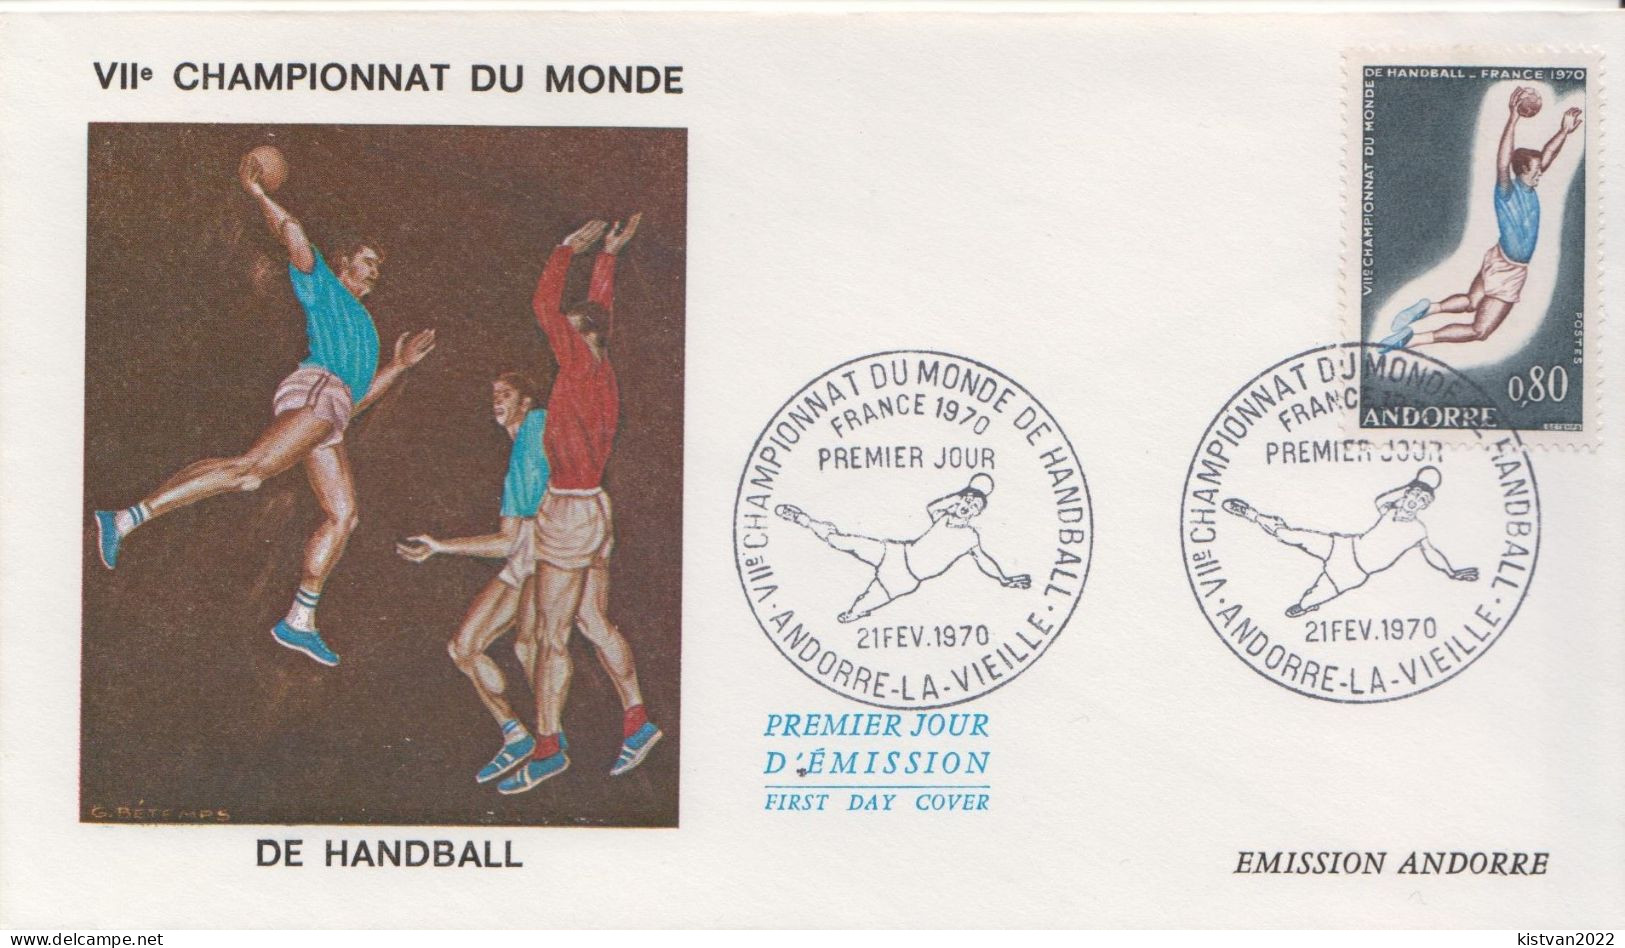 Andorra Stamp On FDC - Balonmano